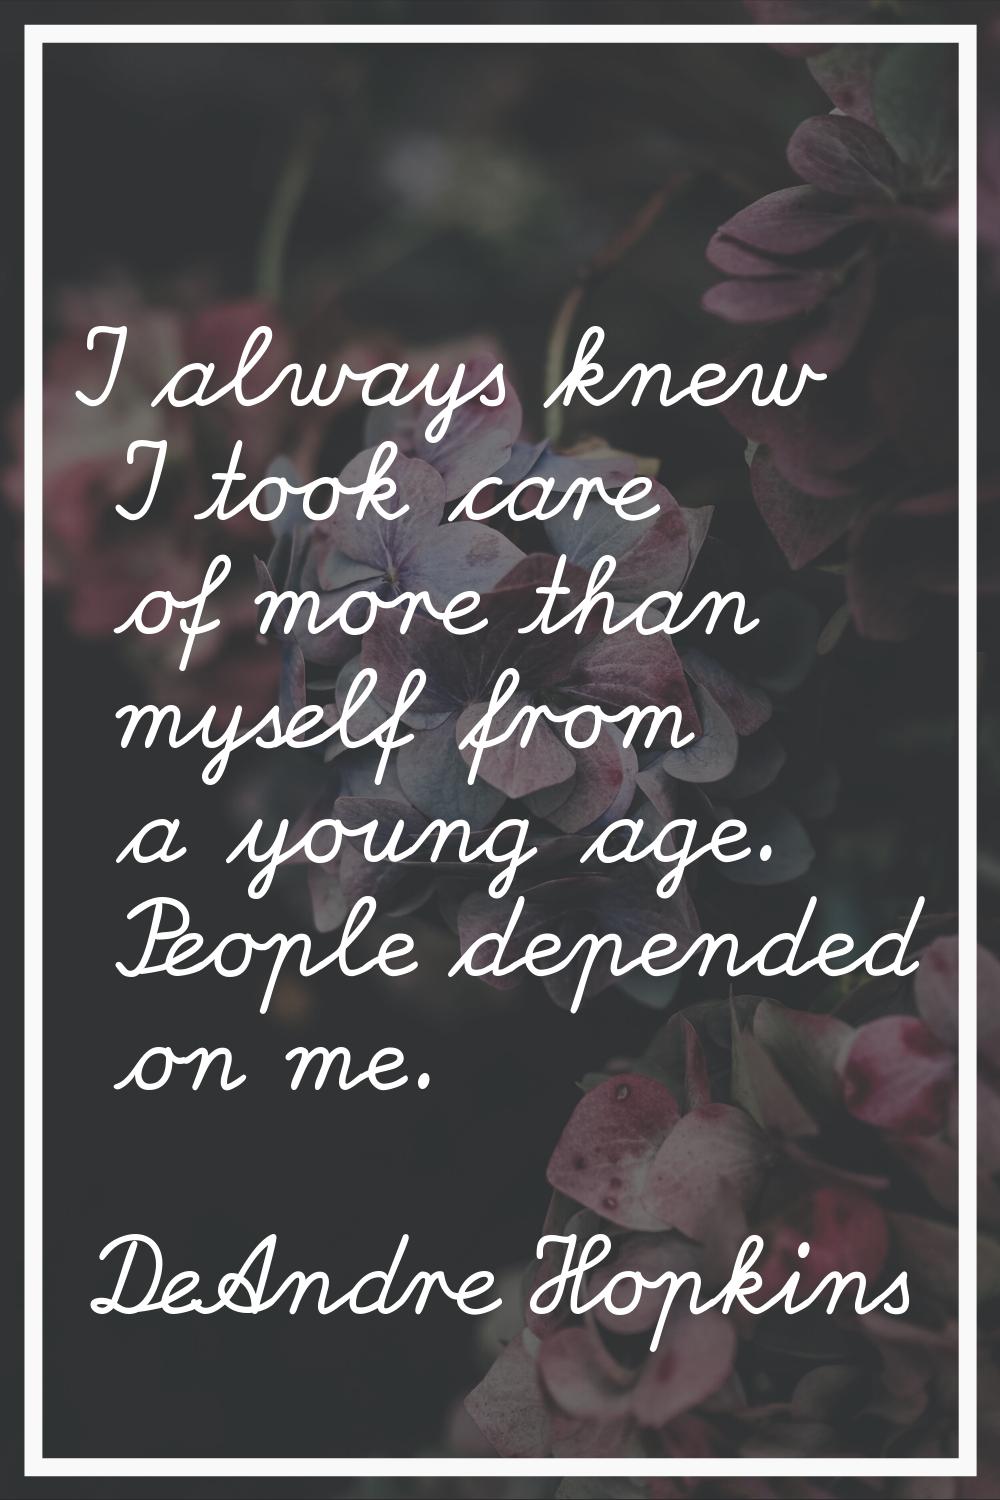 I always knew I took care of more than myself from a young age. People depended on me.